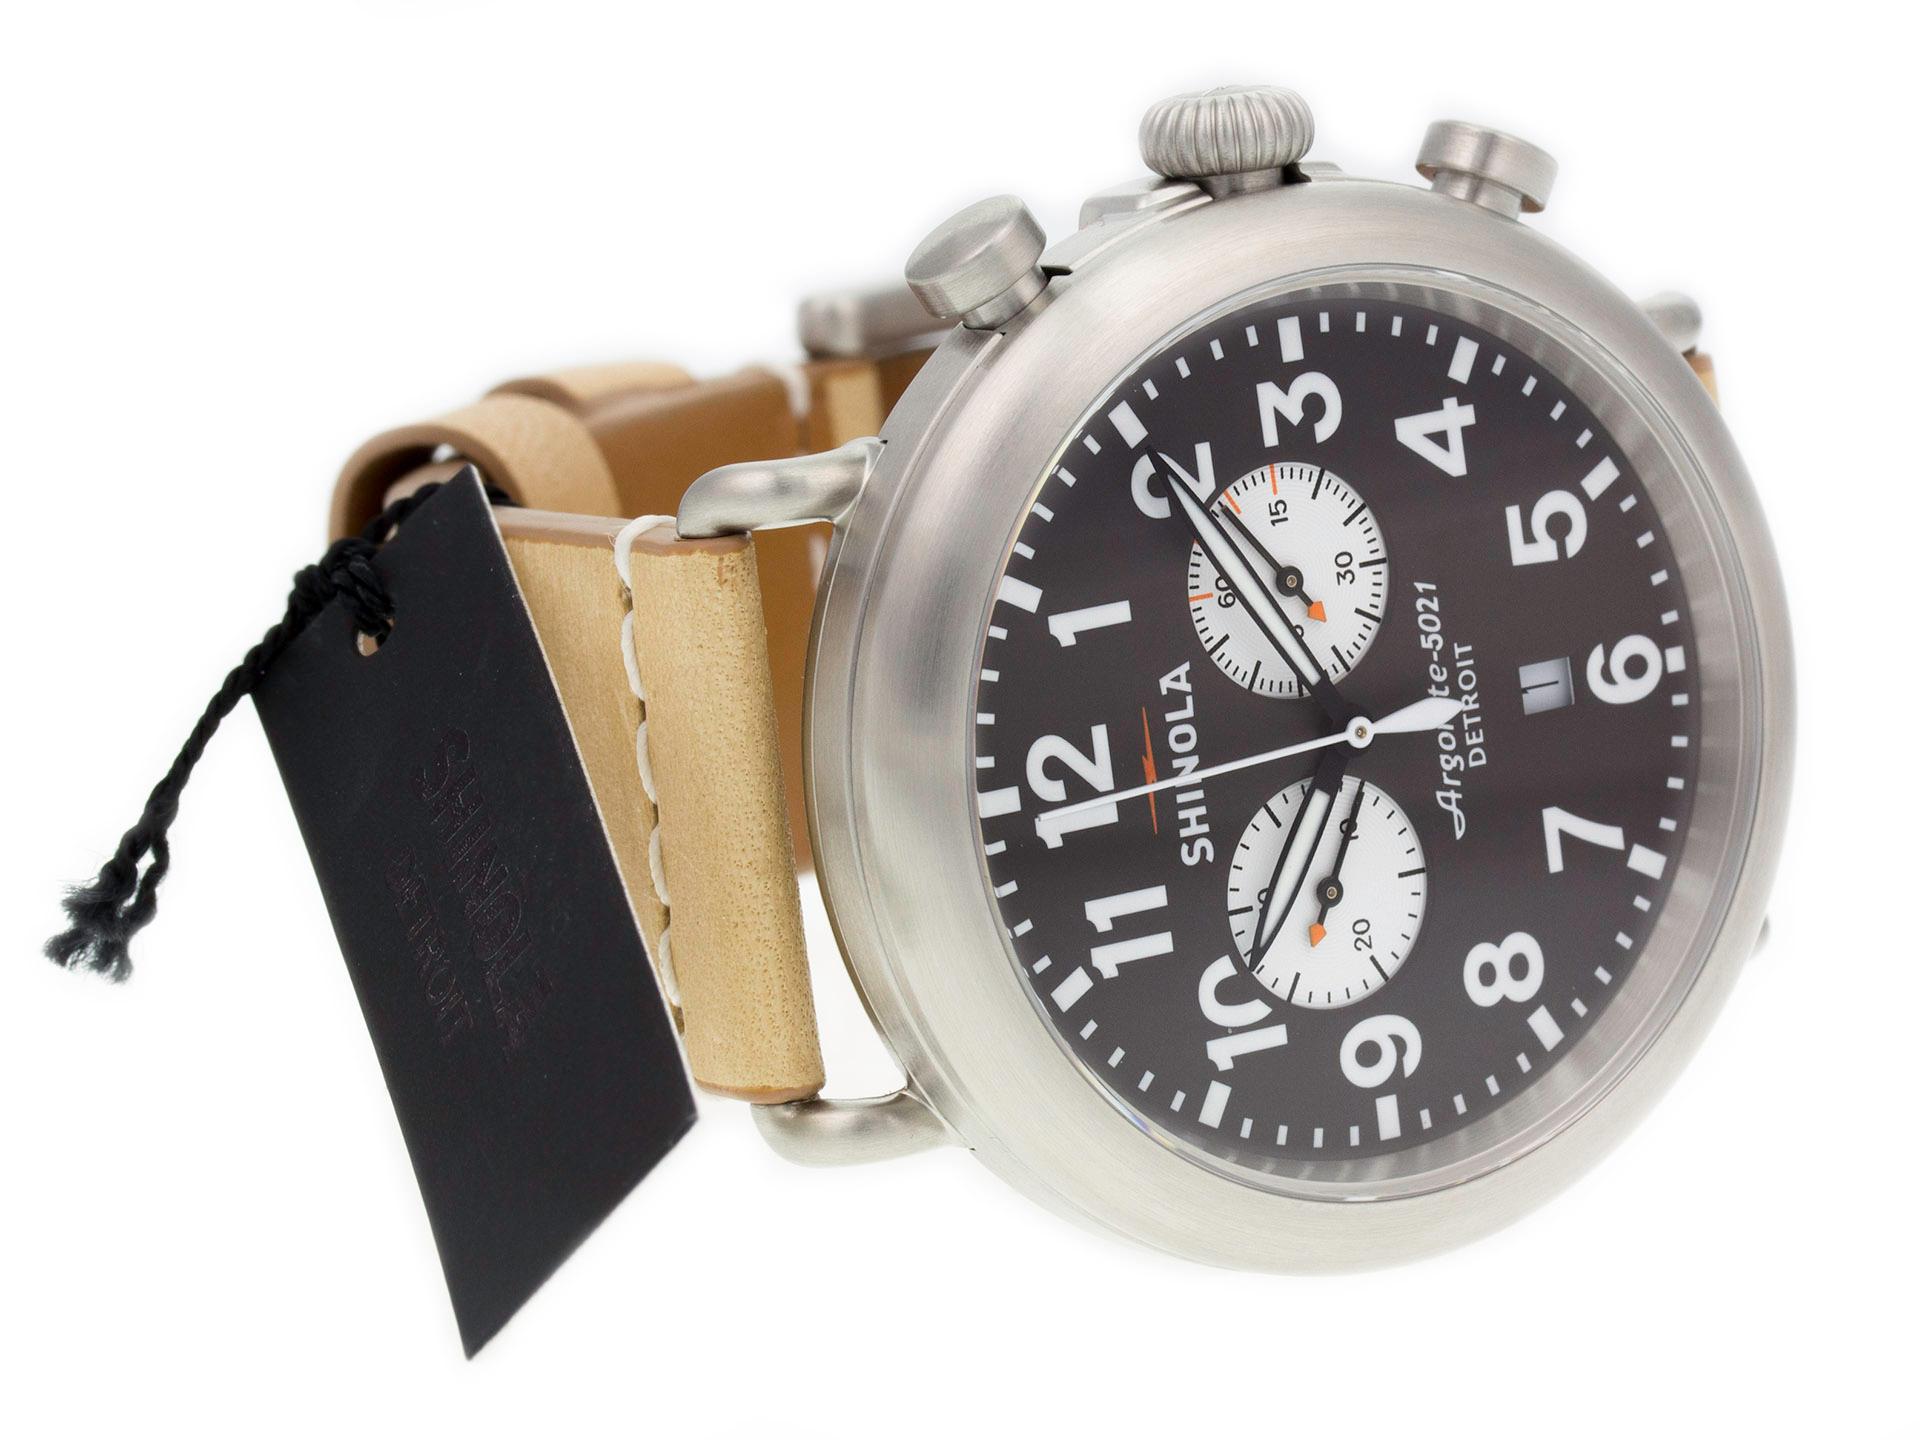 Steel Shinola The Runwell quartz watch with a 47mm case, brown-gray dial, and tan leather strap with tang buckle. Features include hours, minutes, seconds, date, and chronograph. Comes with a Deluxe Gift Box and 2 Year Store